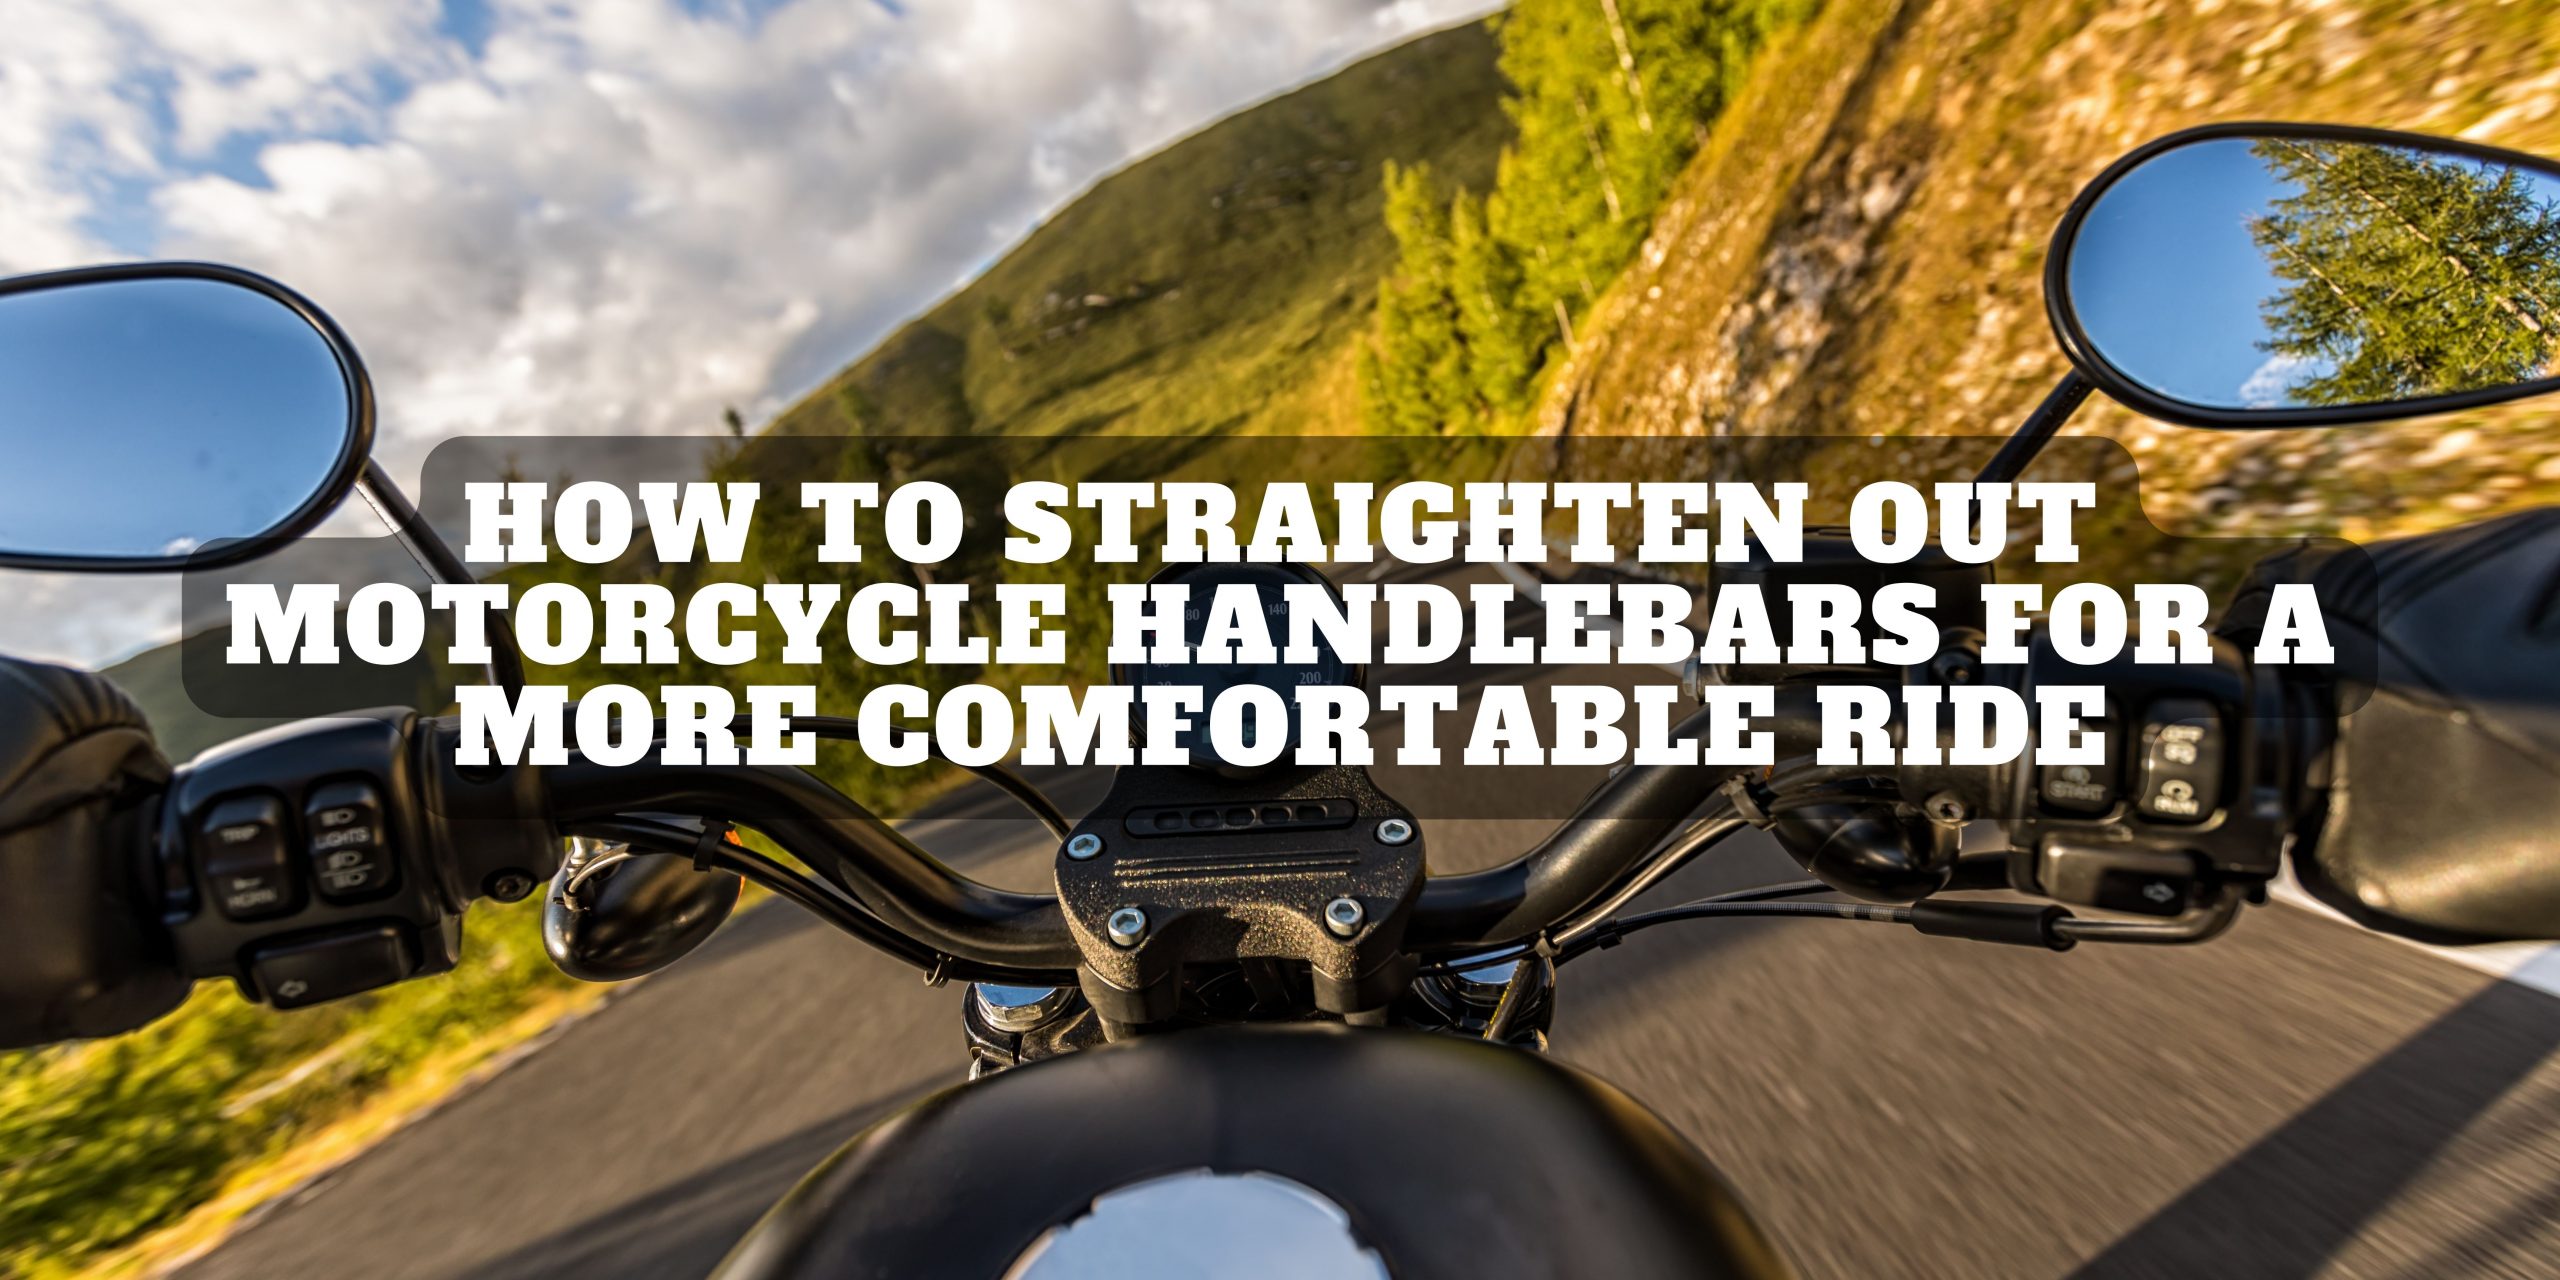 You are currently viewing How to Straighten Out Motorcycle Handlebars for a More Comfortable Ride